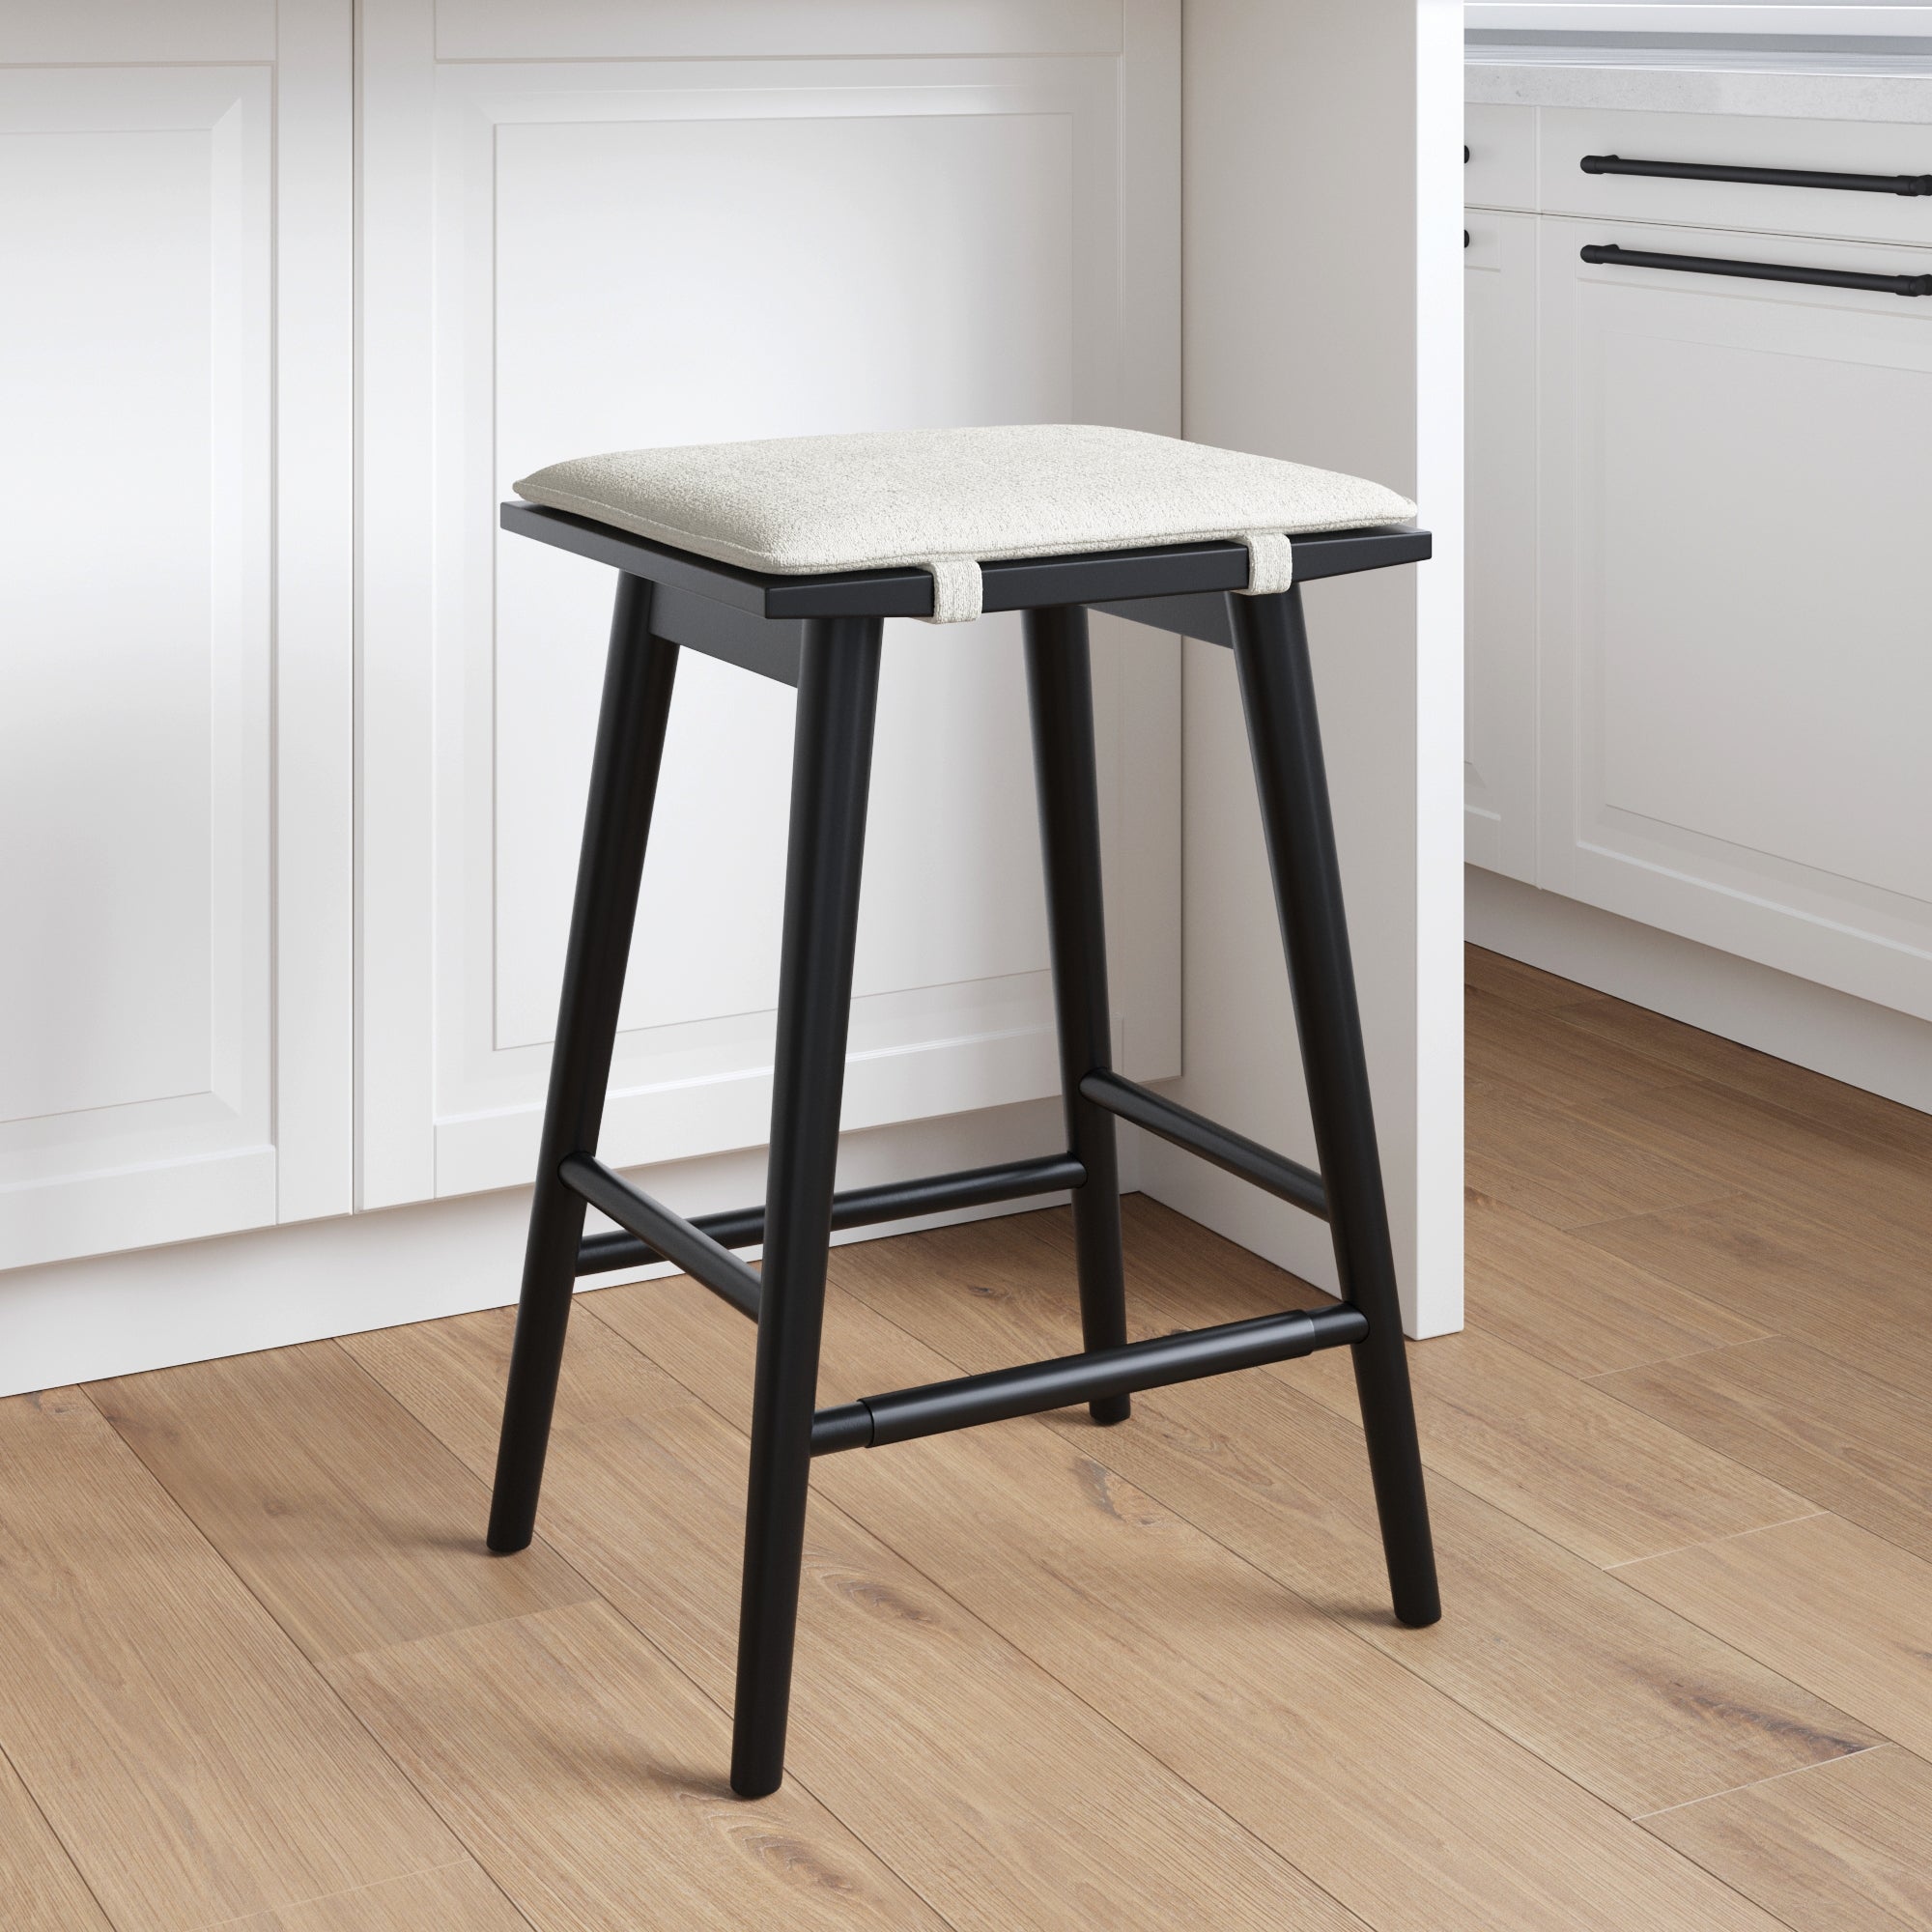 Wood Cushioned Counter Height Bar Stool Black